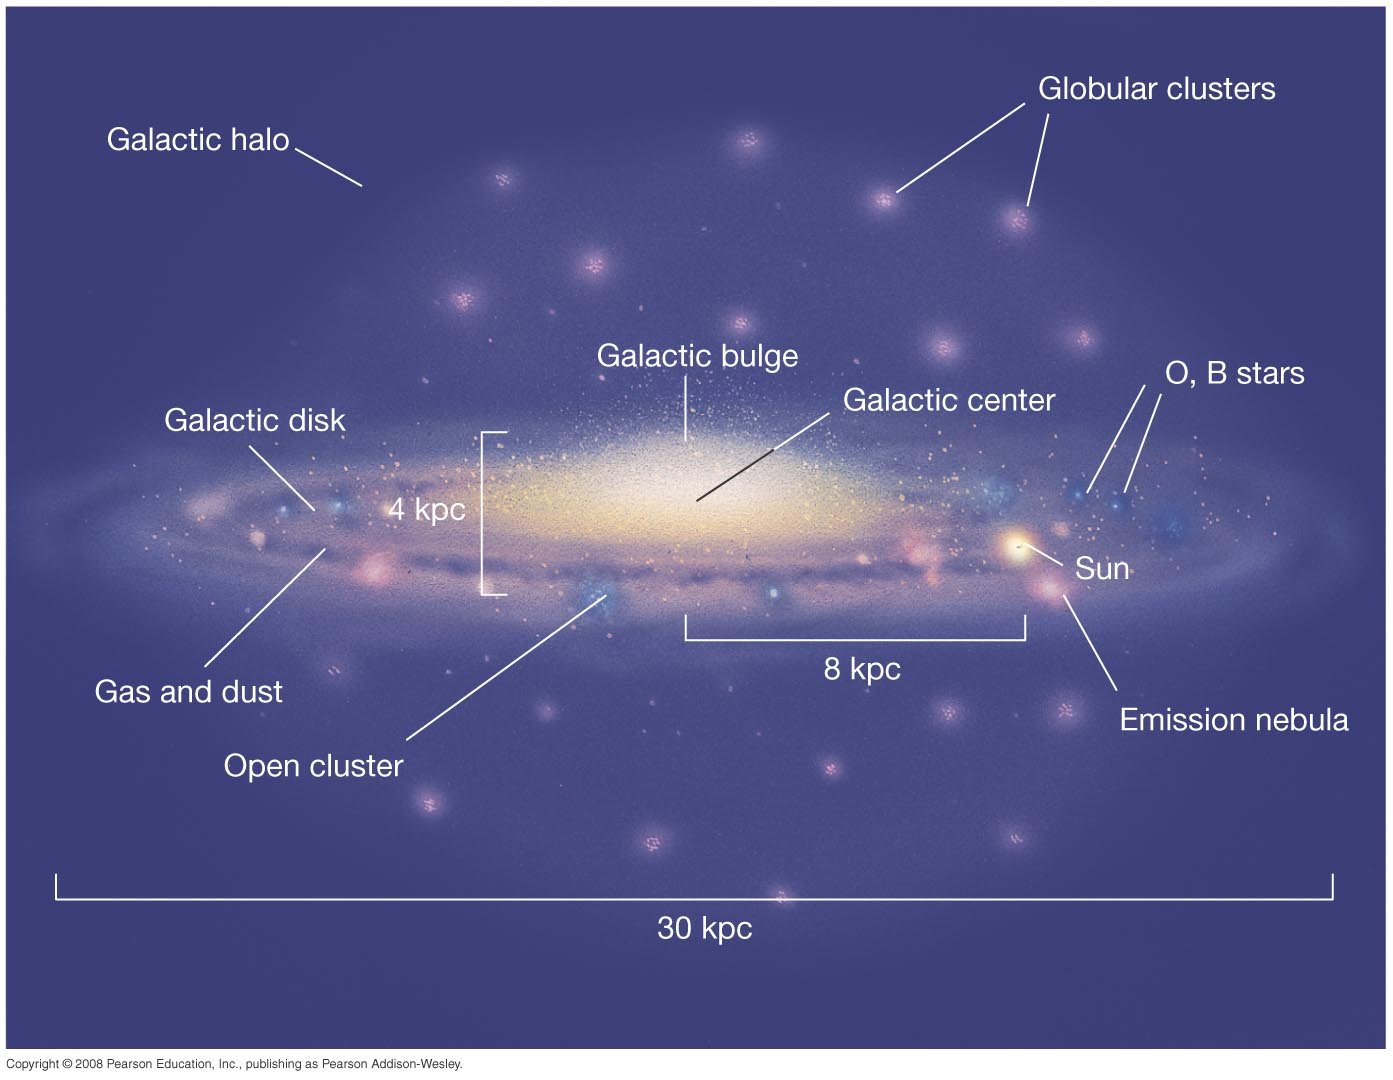 Diagram of galactic components.